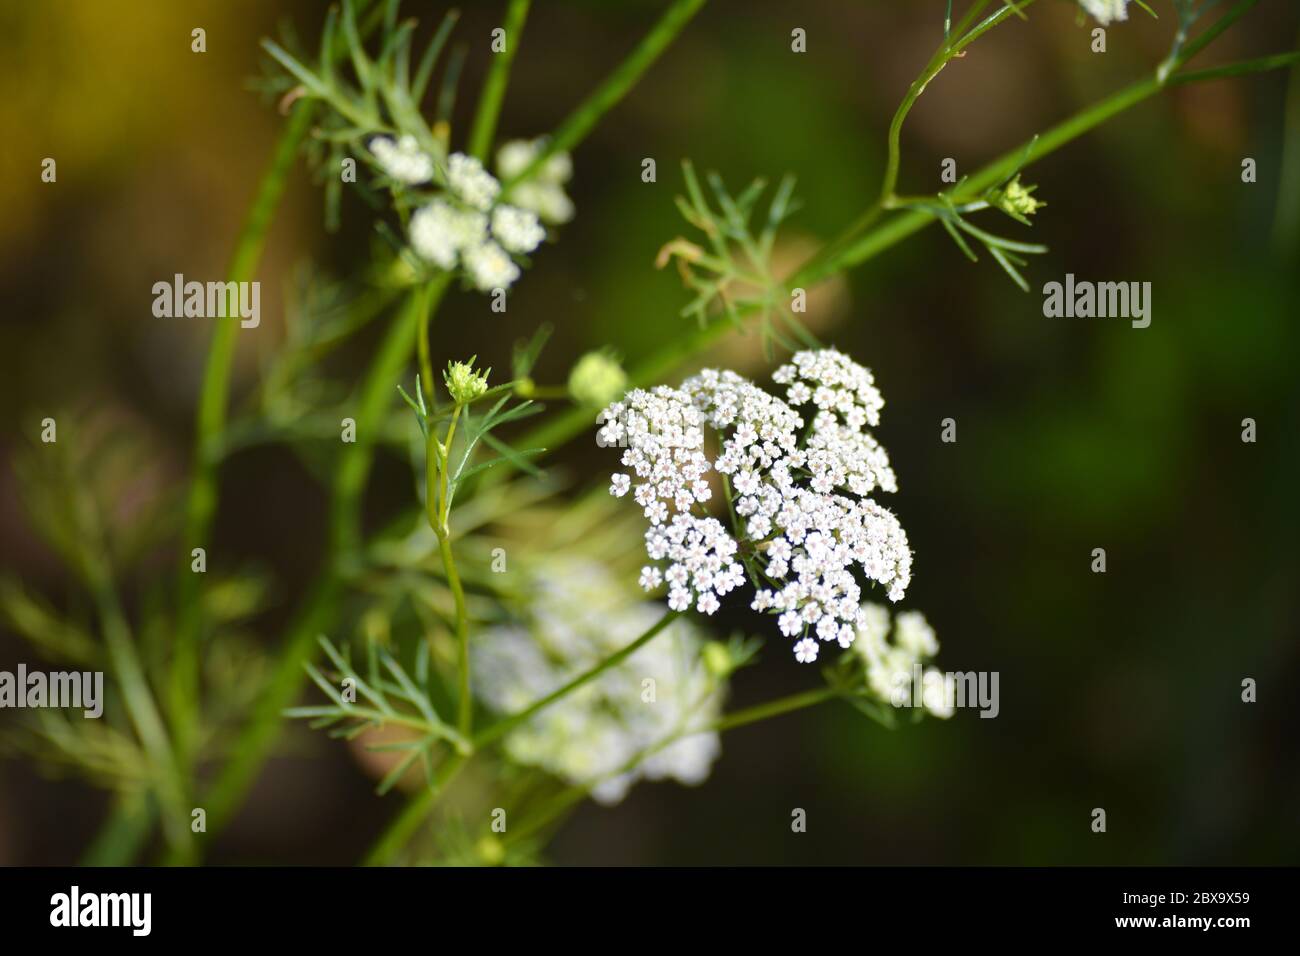 Cumin plant in the garden. Cumin is one of the oldest spices. Stock Photo